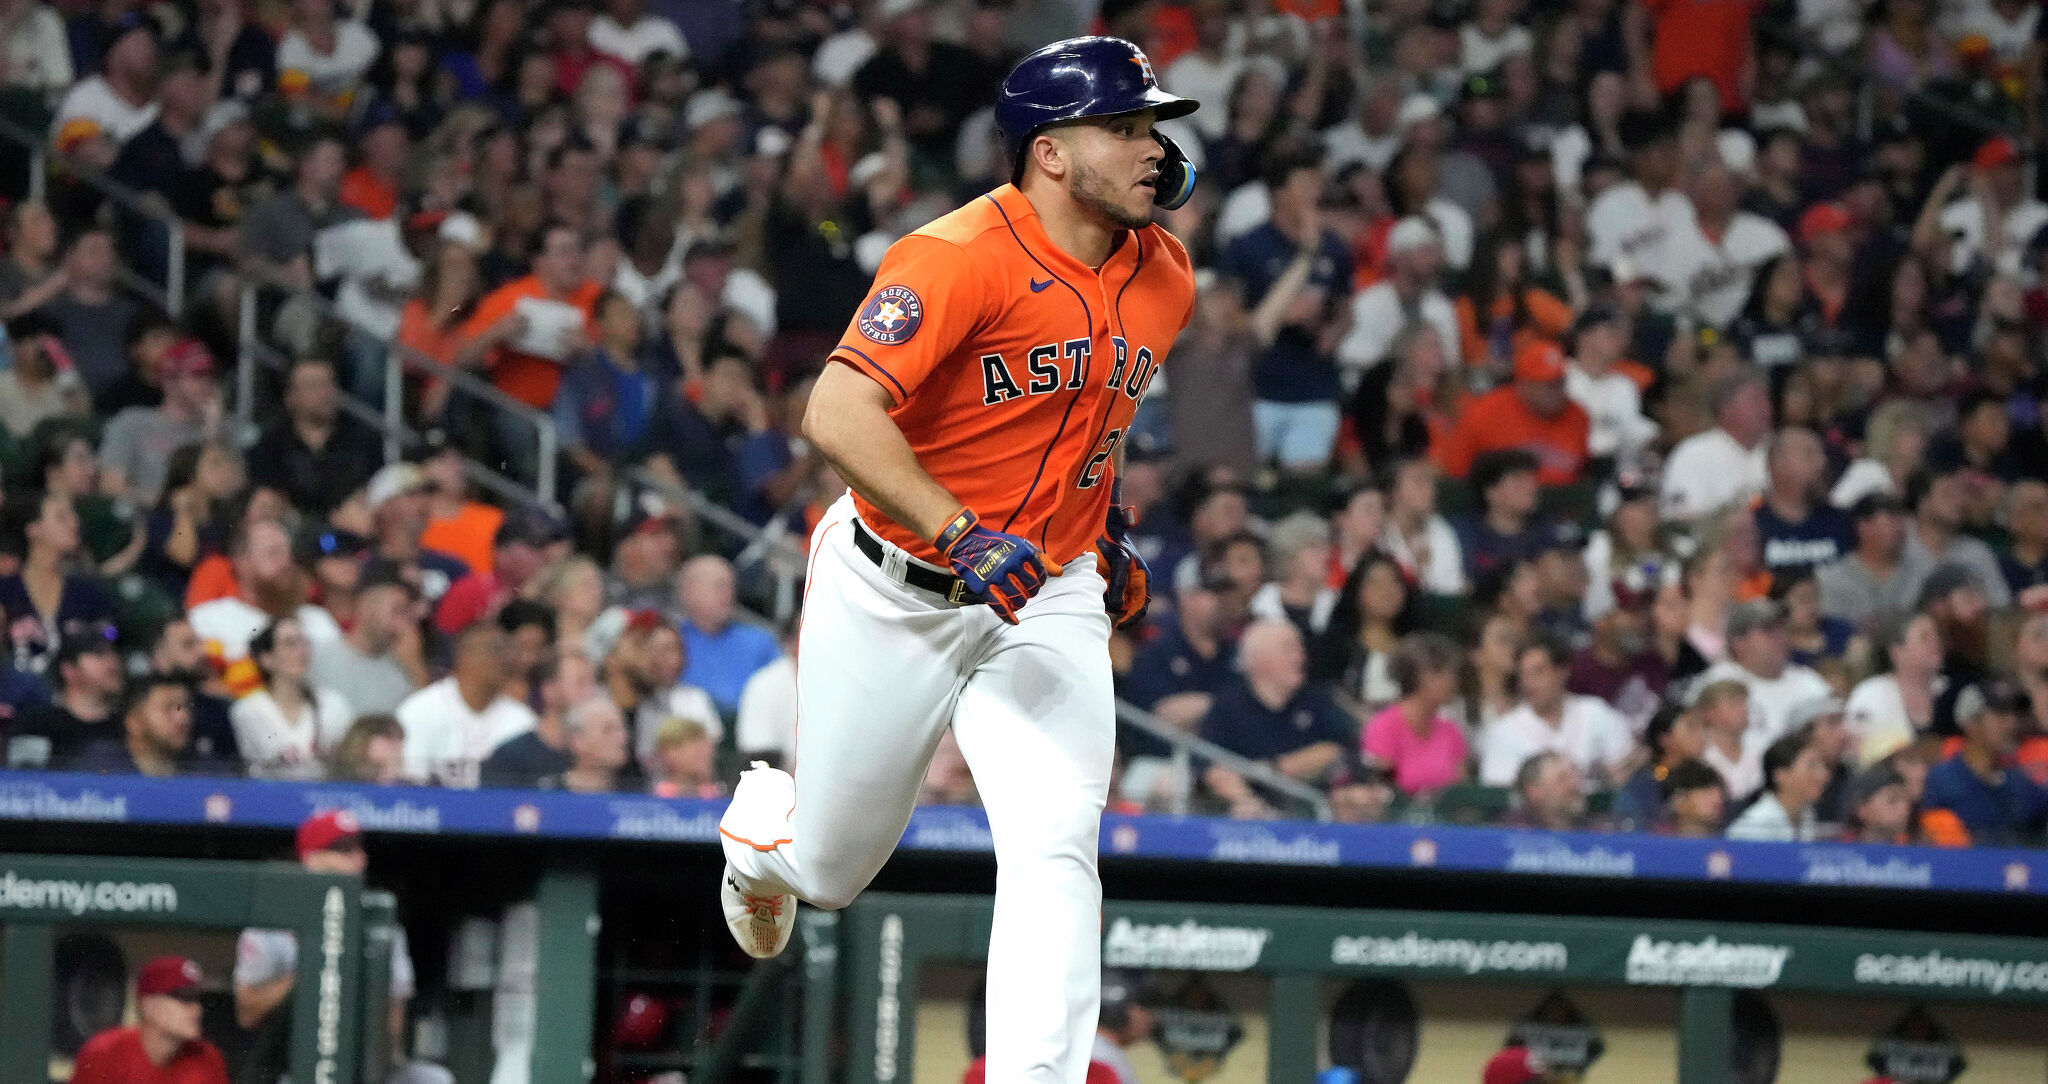 World Series Game 2 - Awesome Astros Gear: Share your favorite